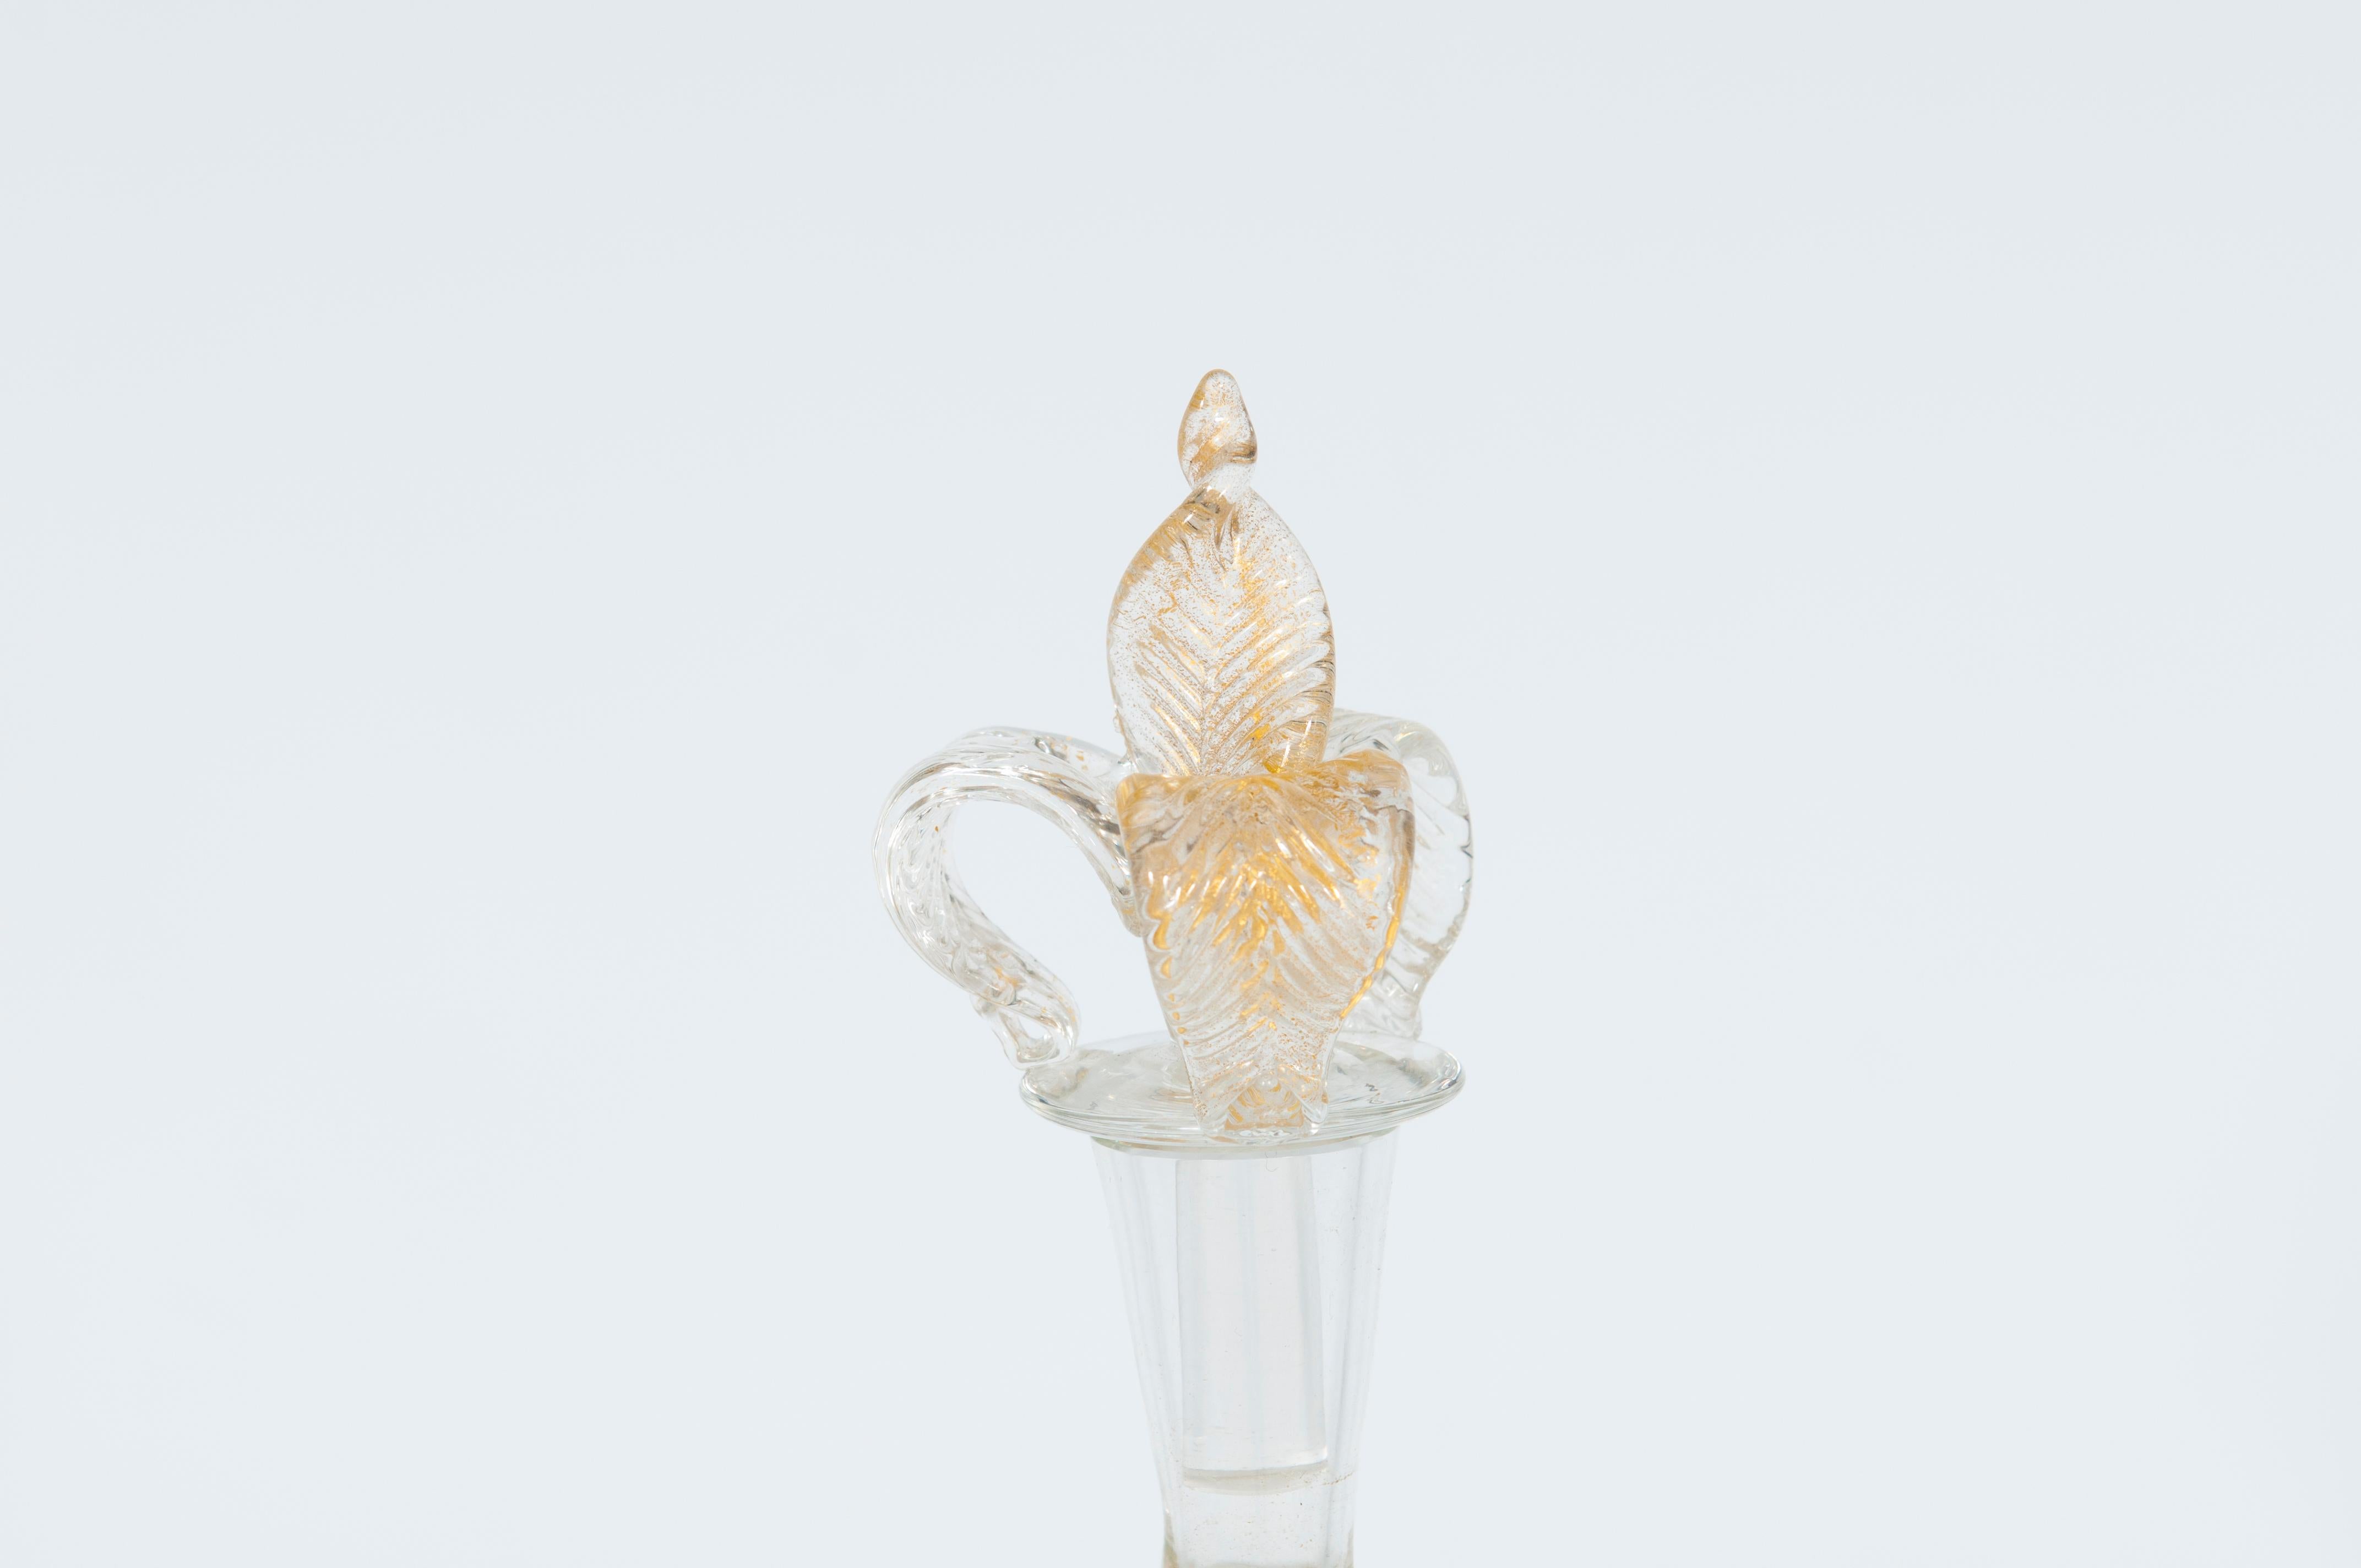 Clear Murano Glass Bottle with 24-Carat Handcrafted Decorated Gold 1980s, Venice For Sale 1